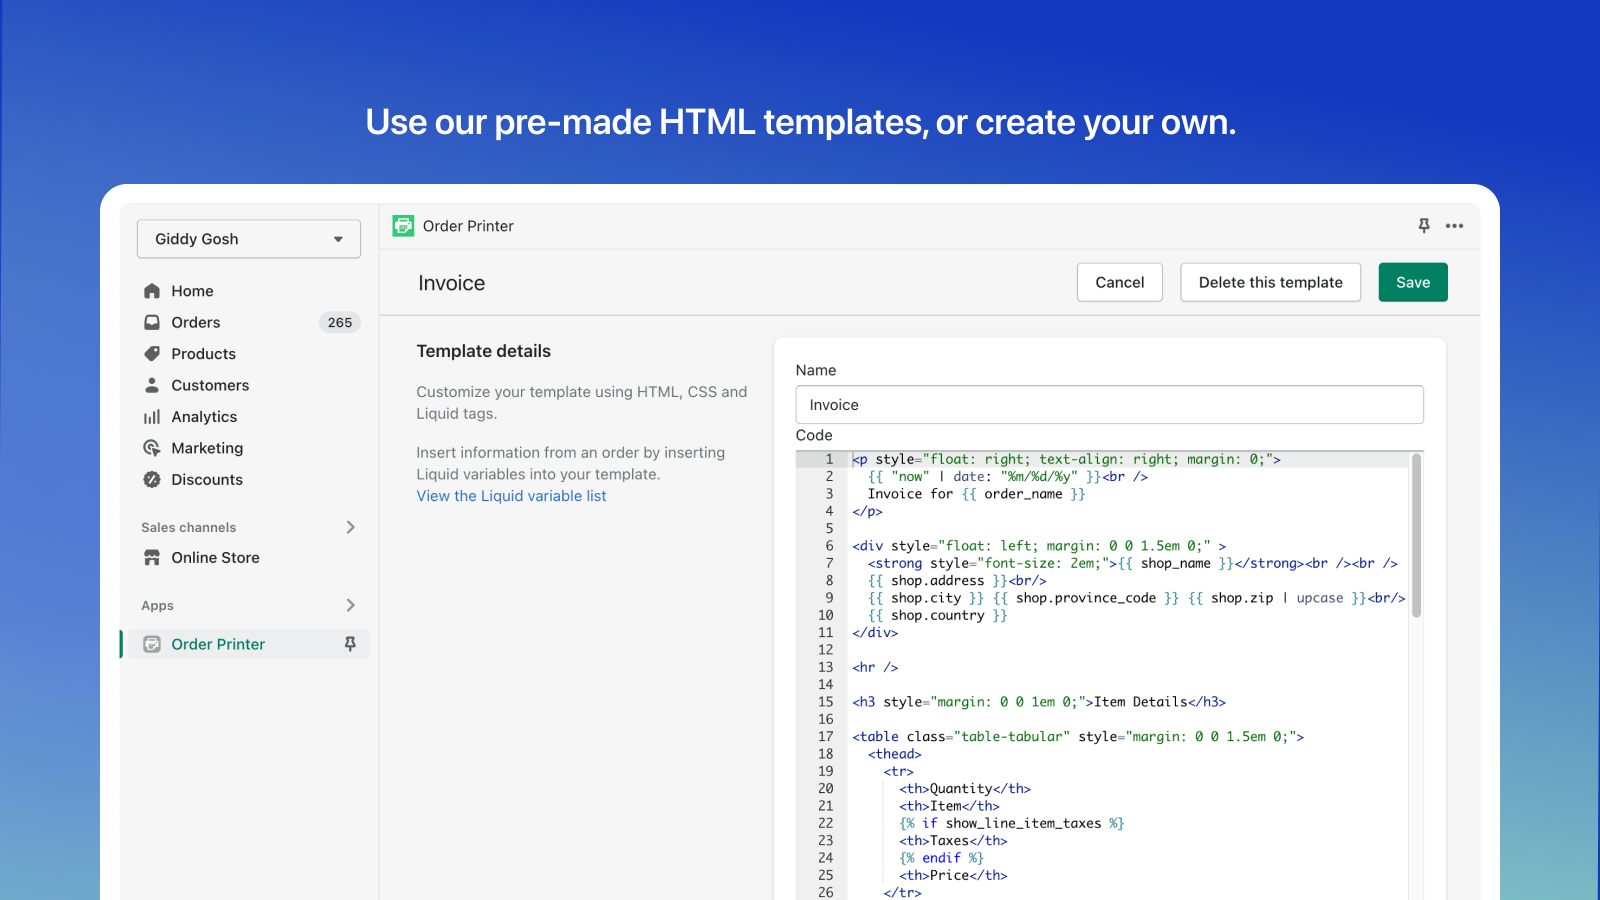 Use our pre-made HTML templates, or create your own.